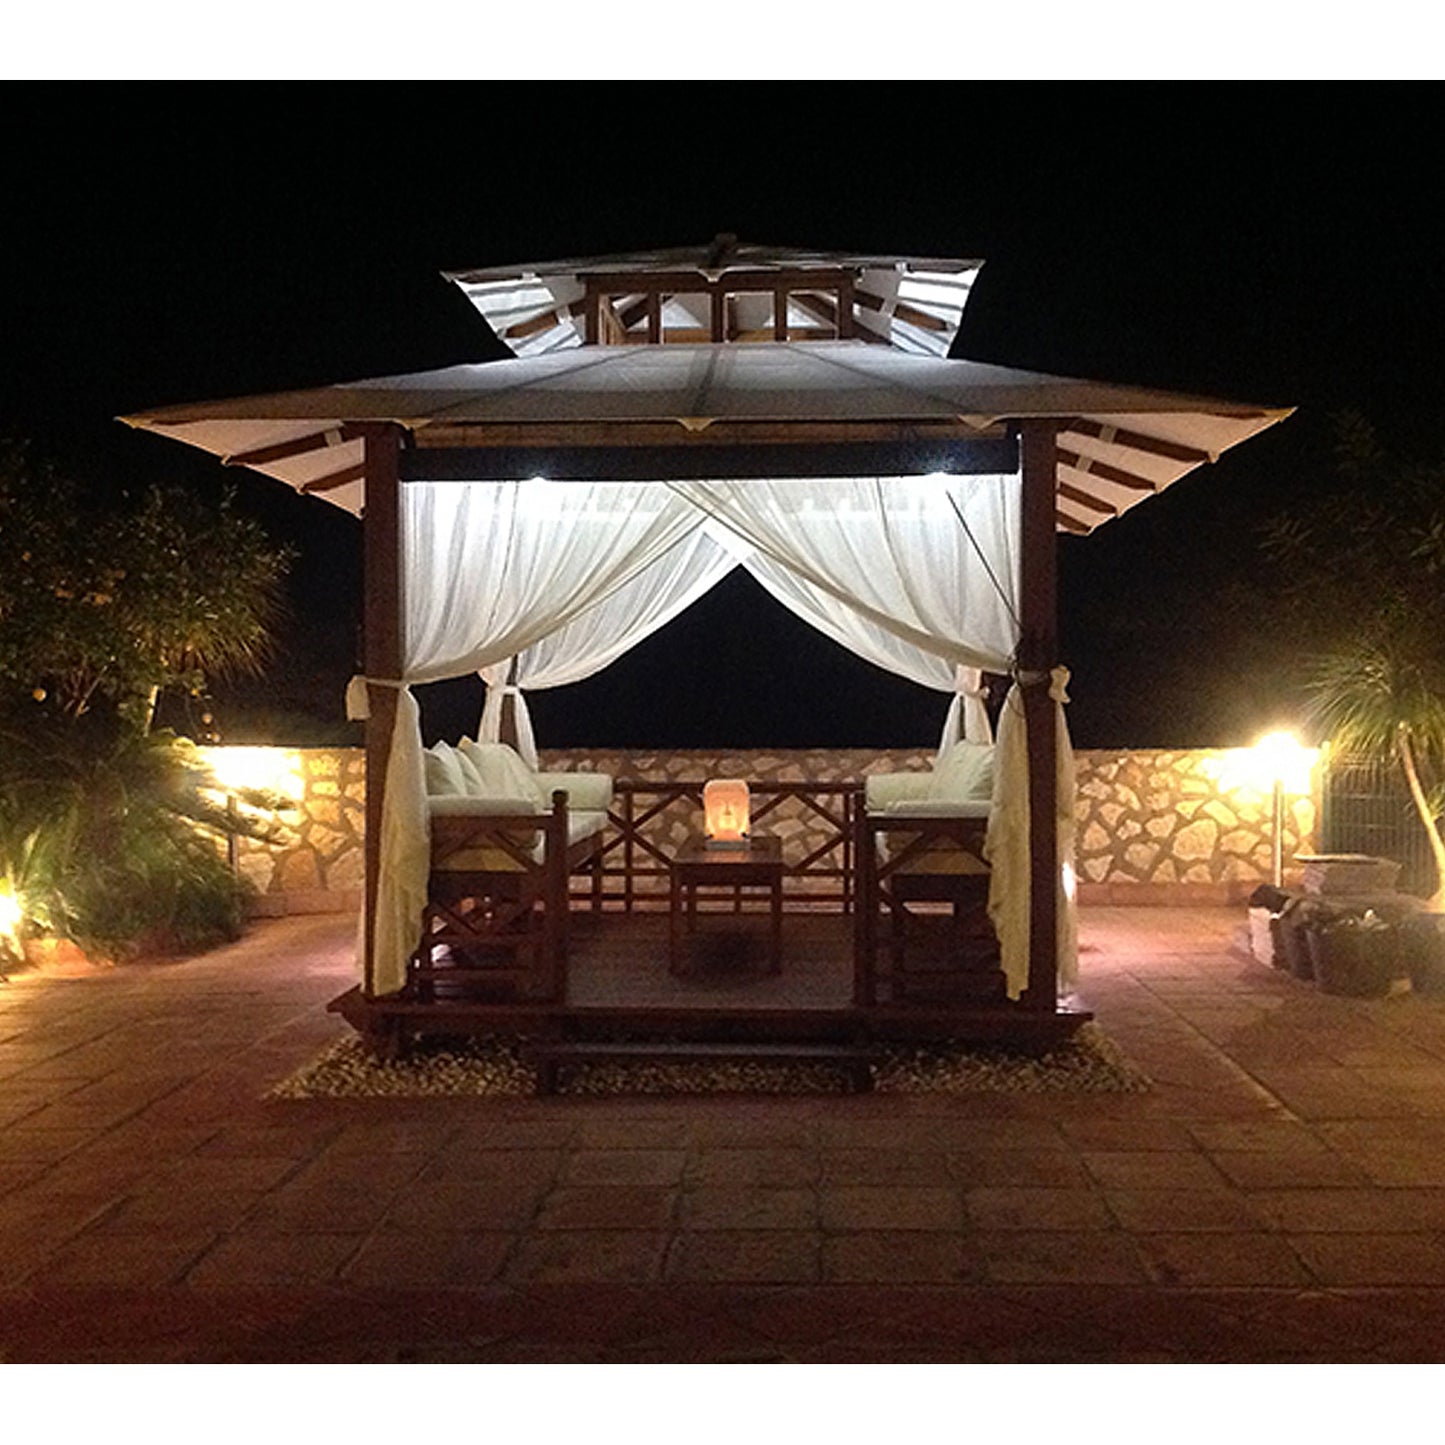 Exaco | 10x10 Ft Exquisite Handcrafted Solid Wood Gazebo With Canopy, Coffee Table and Benches From Bali Indonesia